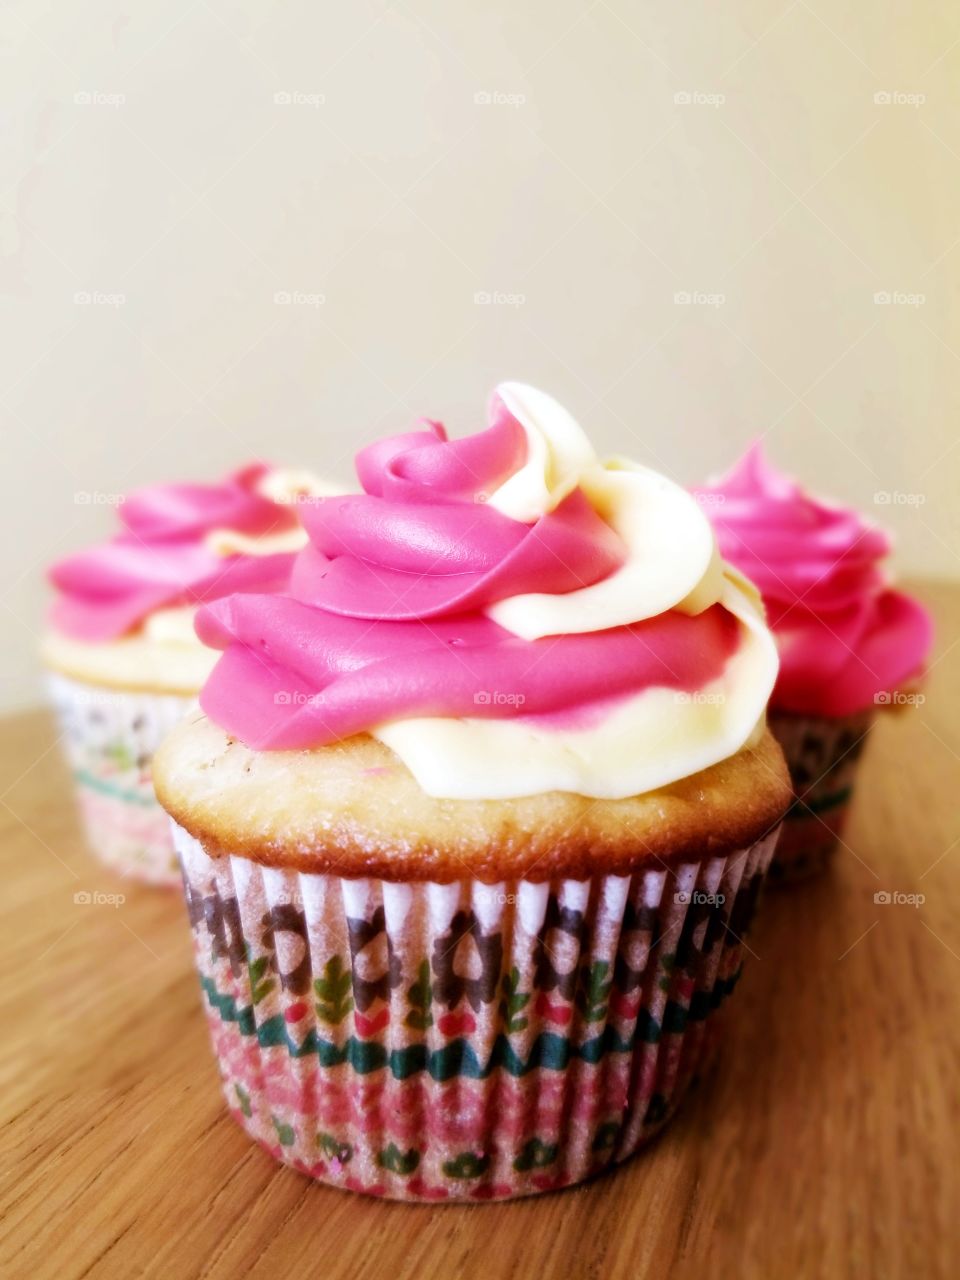 Pink and yellow icing on a cupcake